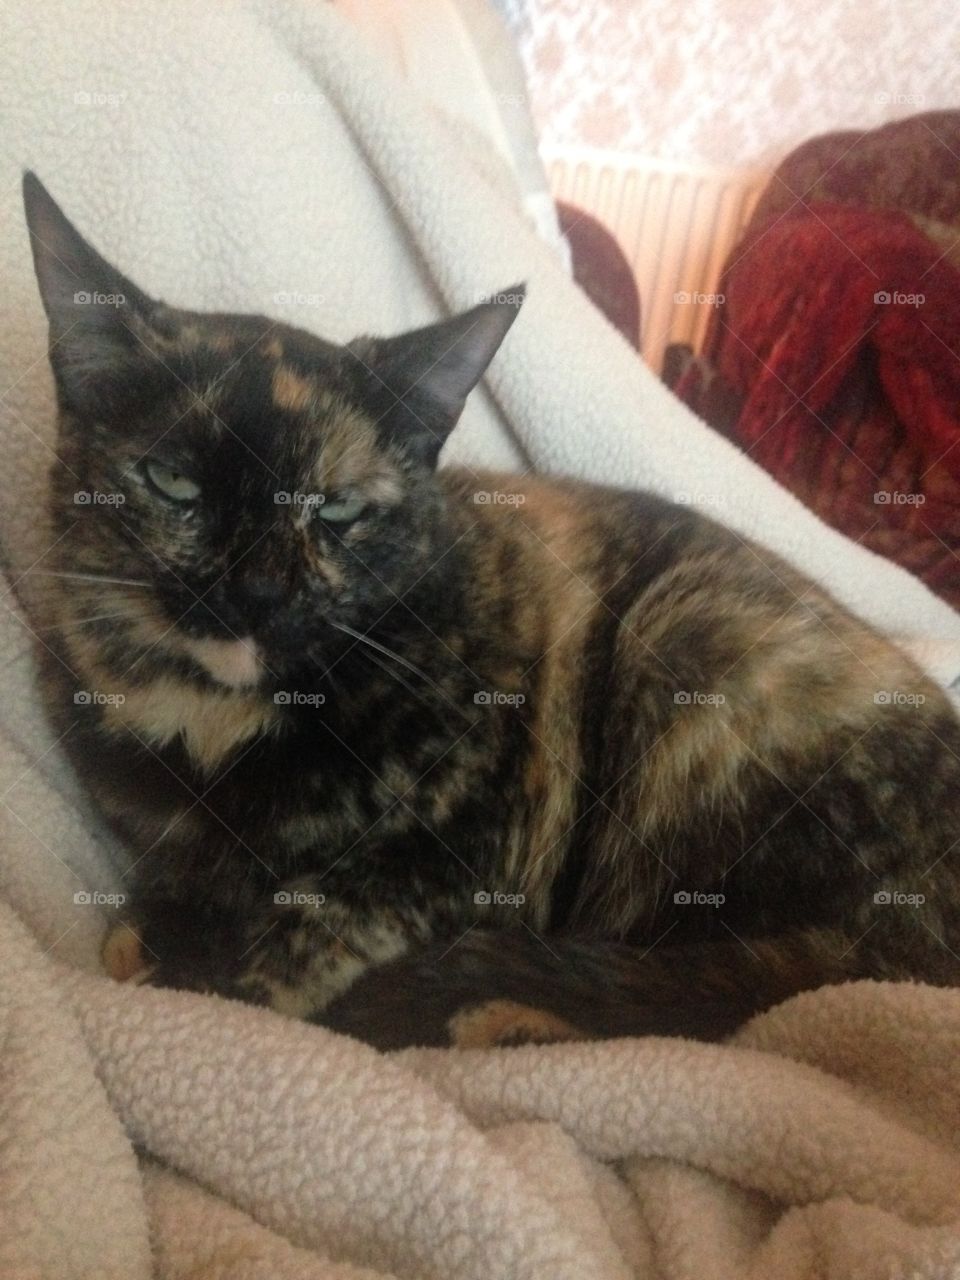 Caitlain, our tortoiseshell, curled up against my pillow. Looks a bit annoyed the flash woke her.